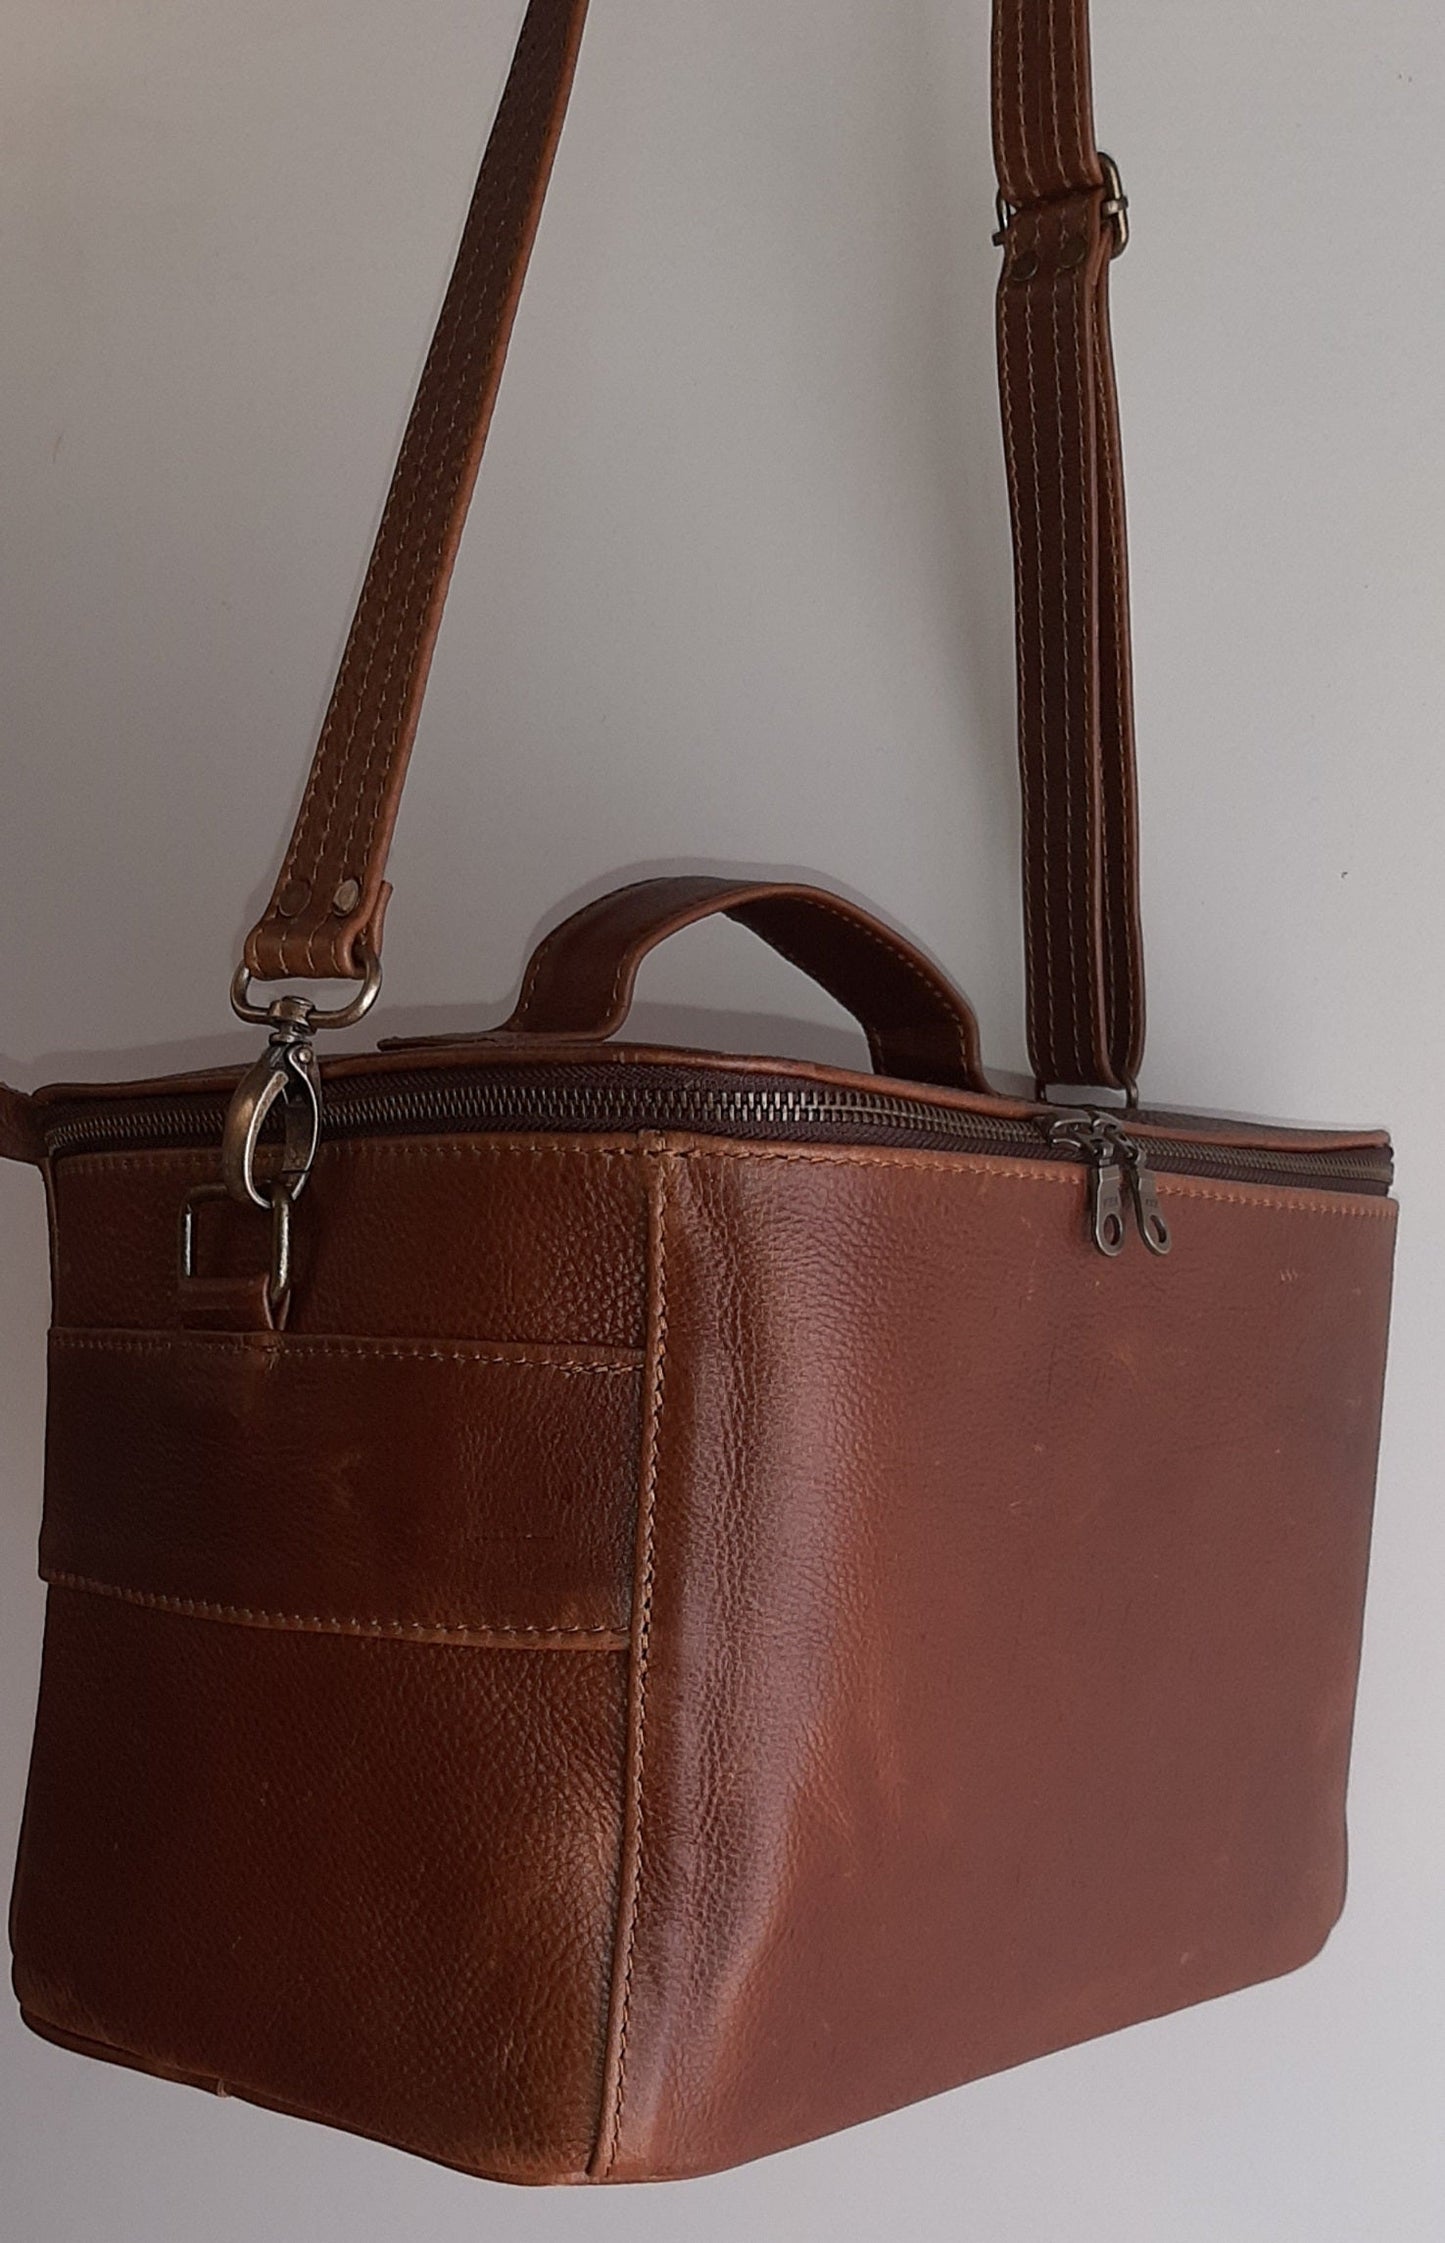 A beautiful hanging vanity bag at cape Masai leather 